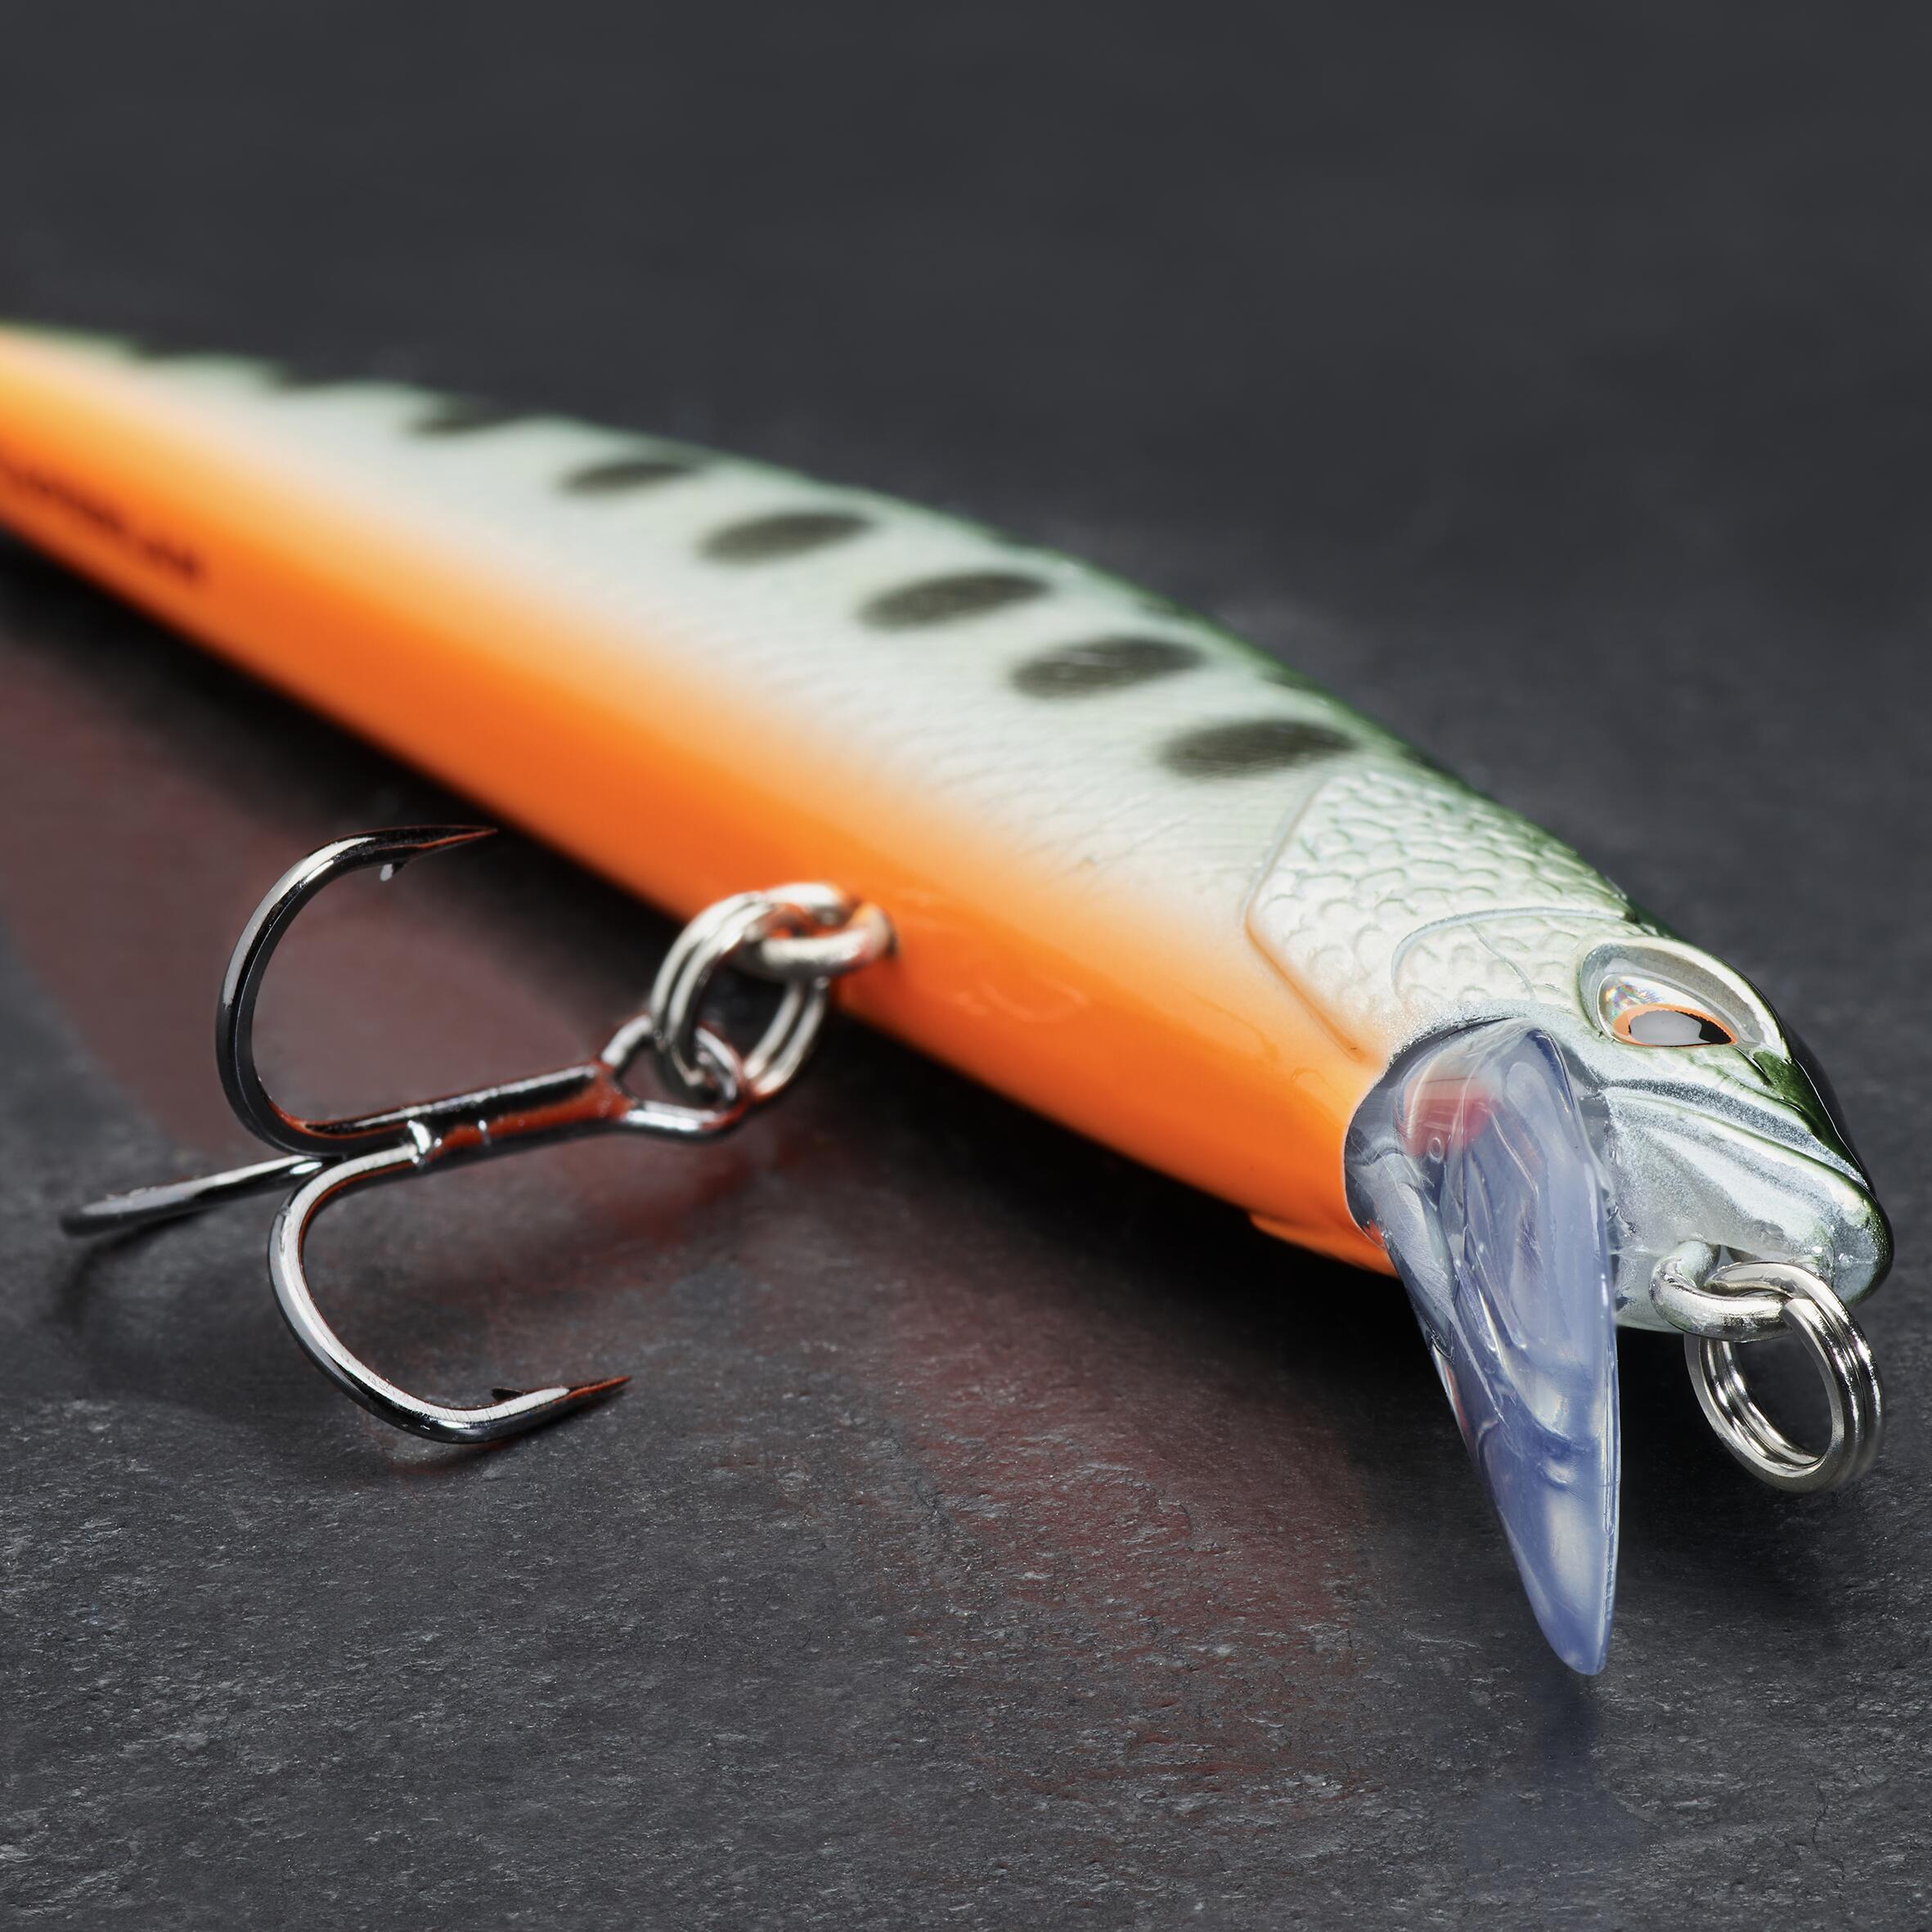 MINNOW HARD LURE FOR TROUT WXM MNWFS 70 US YAMAME - NEON 3/4